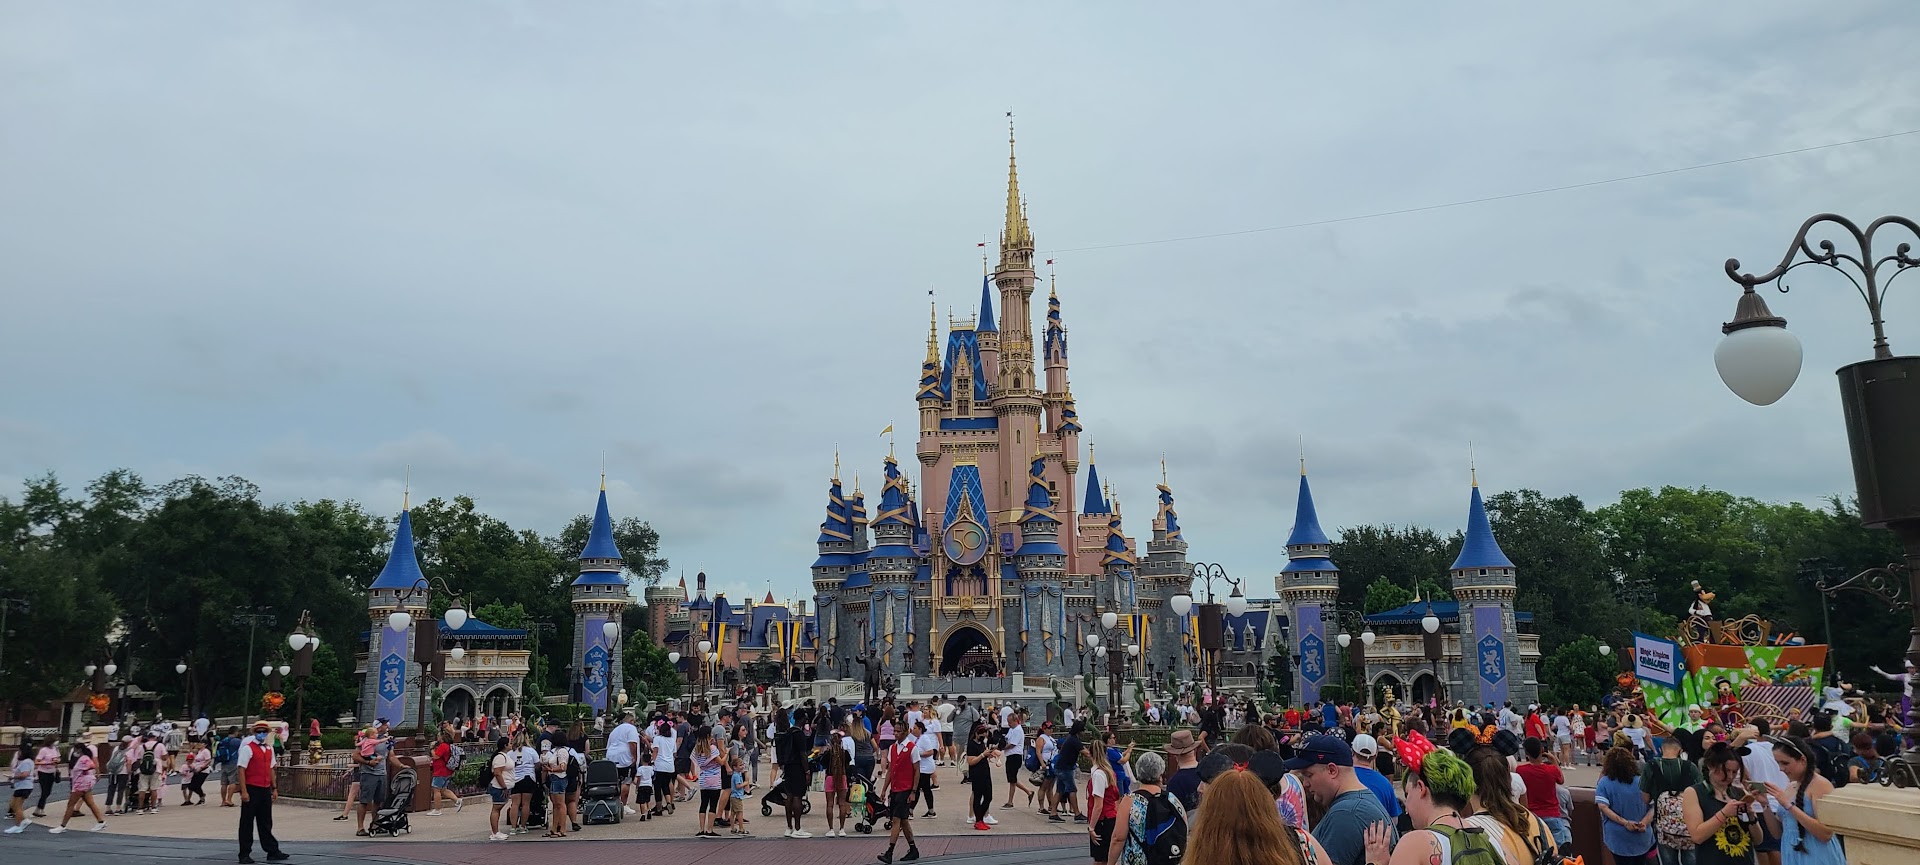 10 Top Secret Disney World Tips (Number 5 Is Awesome!) 34